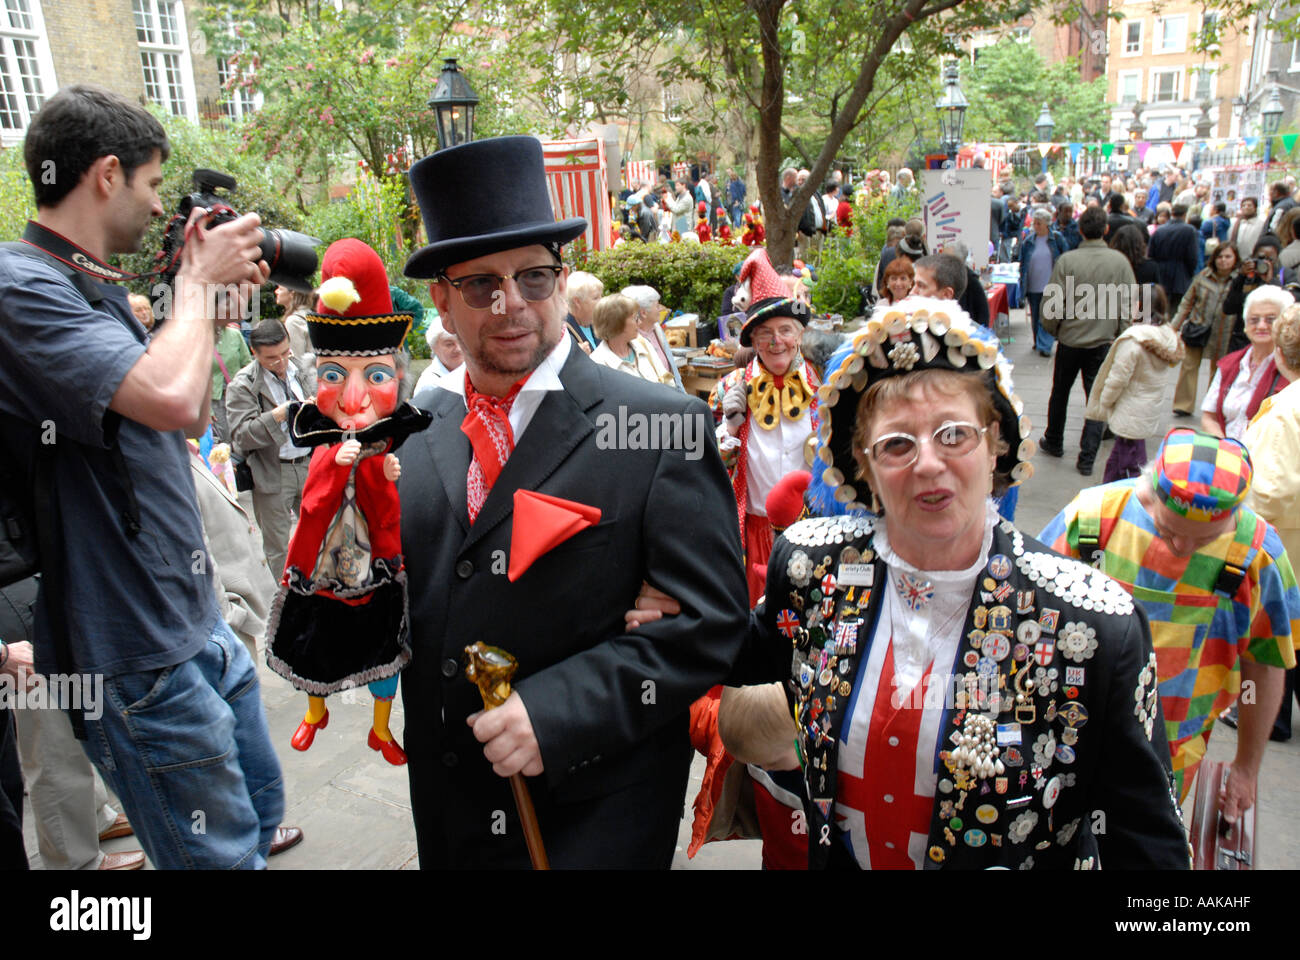 Pearly Kings and Queens in the grounds of St Pauls Church Covent Garden London Stock Photo